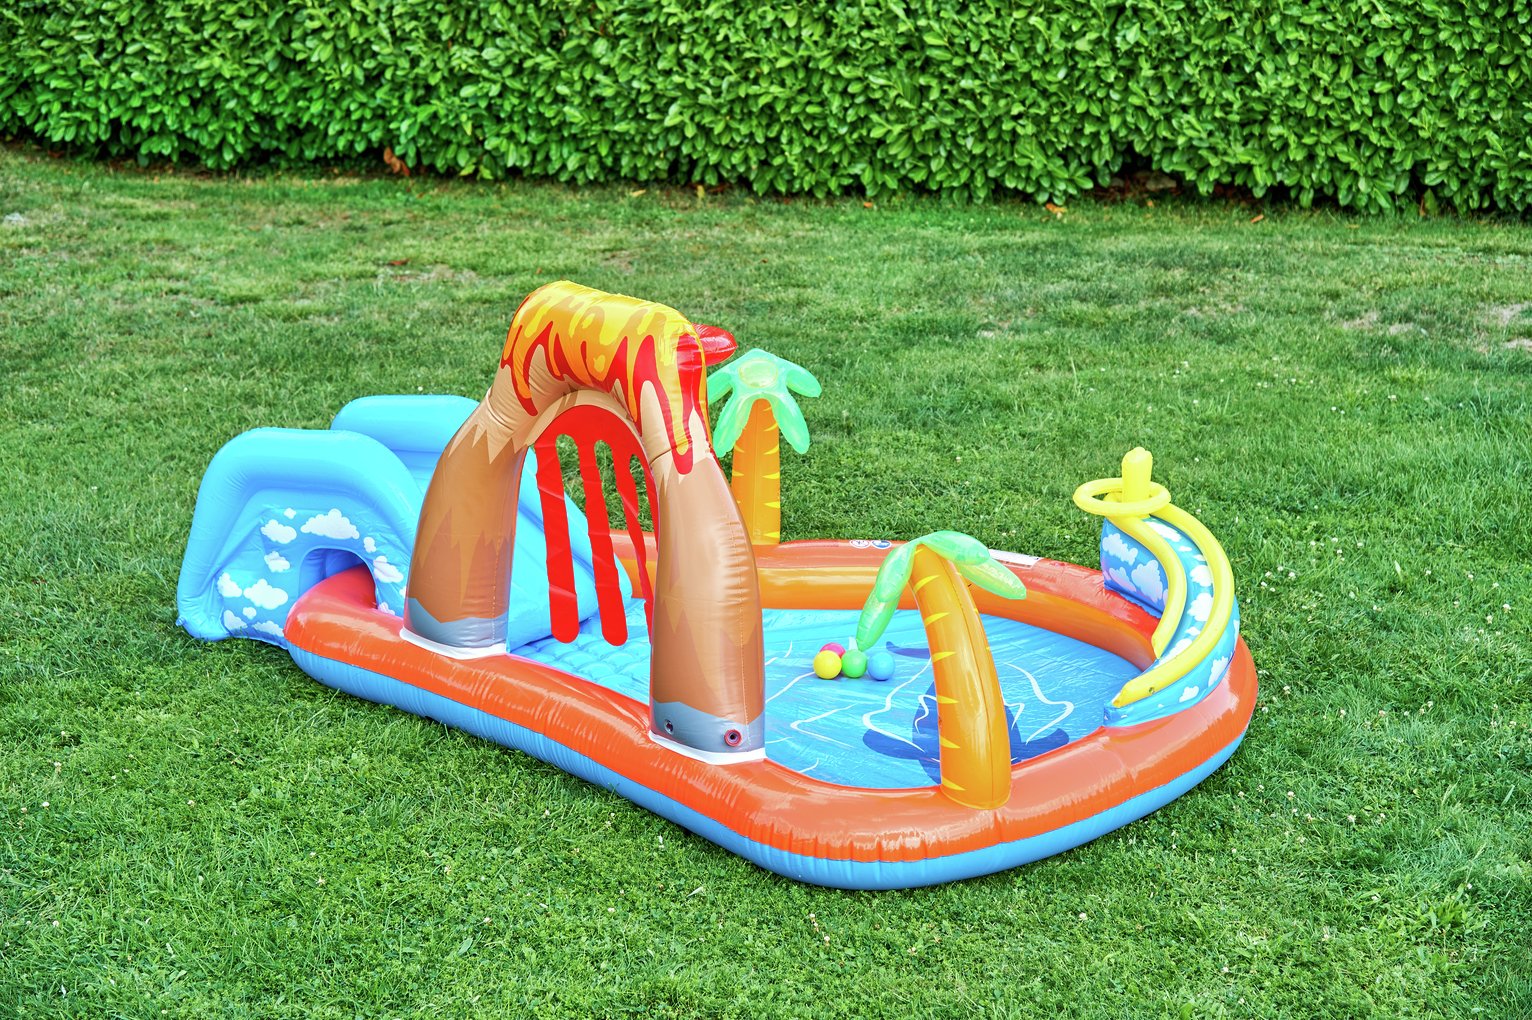 Chad Valley 8.5ft Volcano Activity Kids Paddling Pool Review